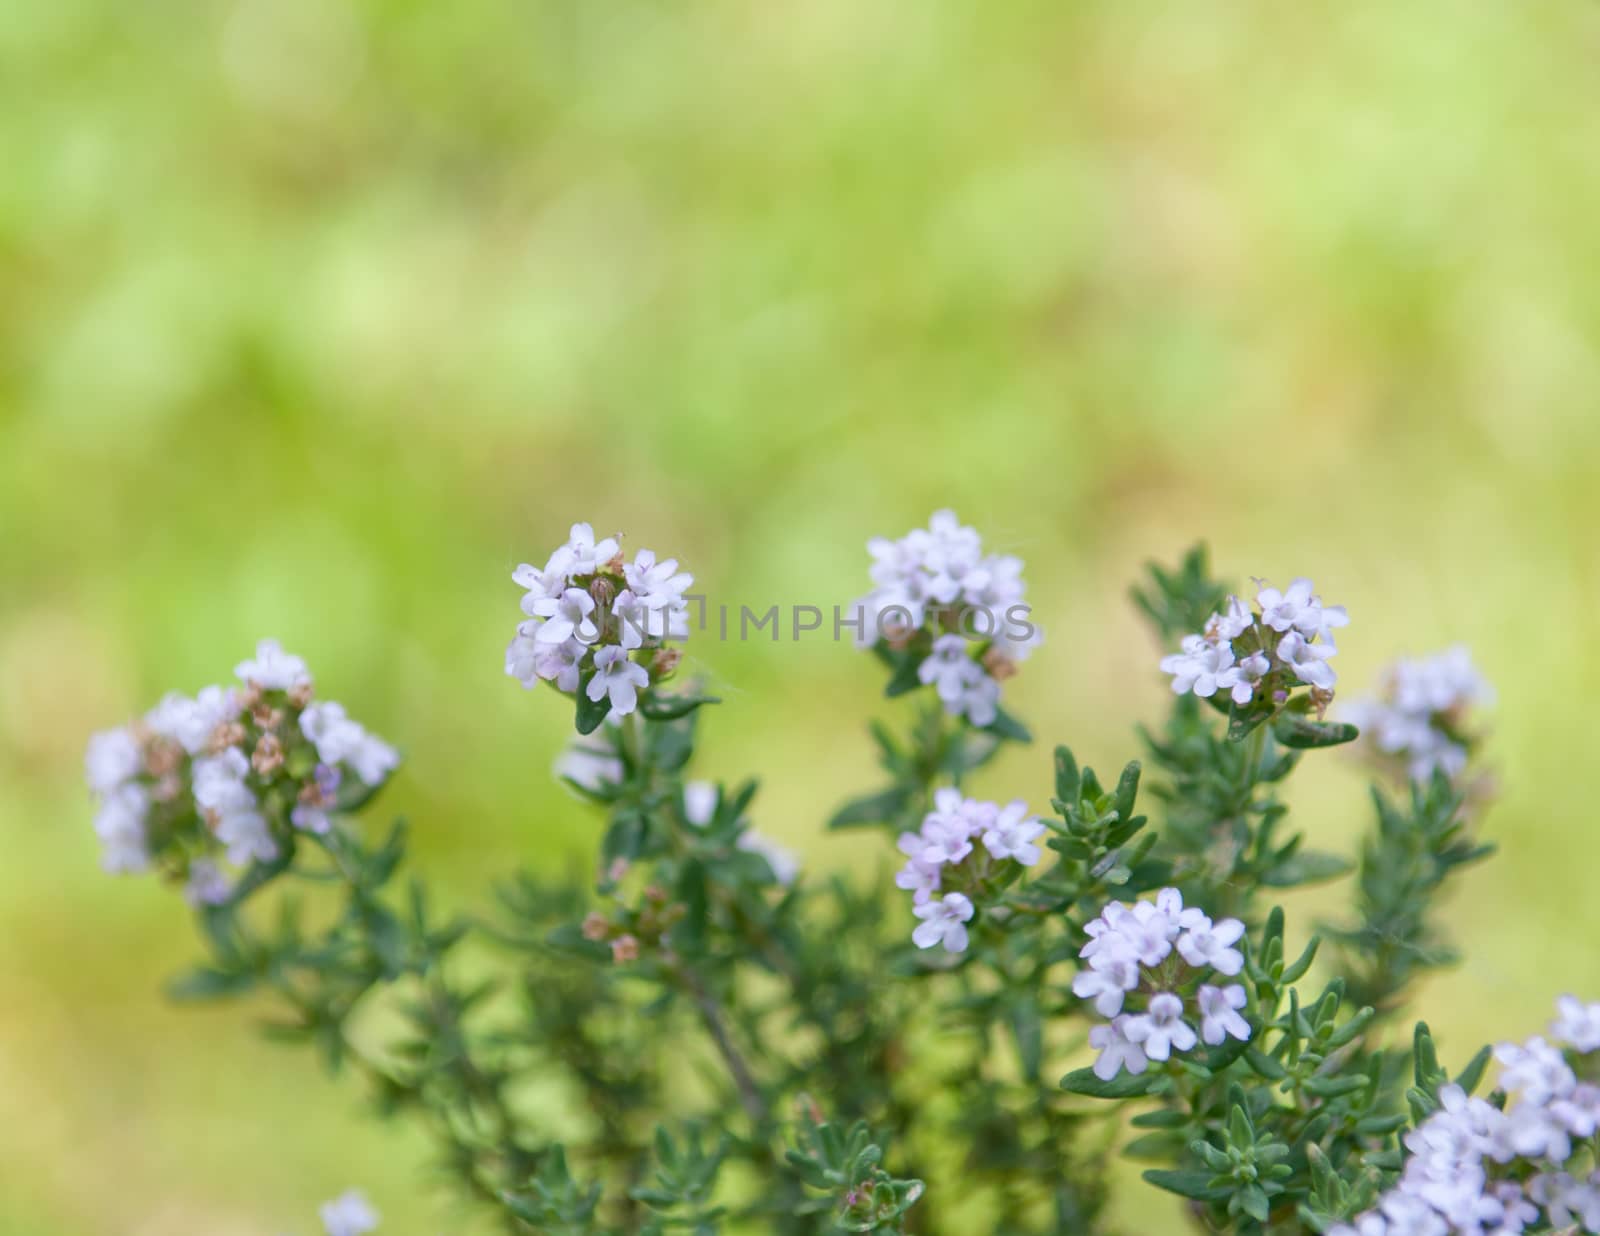 Flowering thyme plant with green background outdoor copy space horizontal